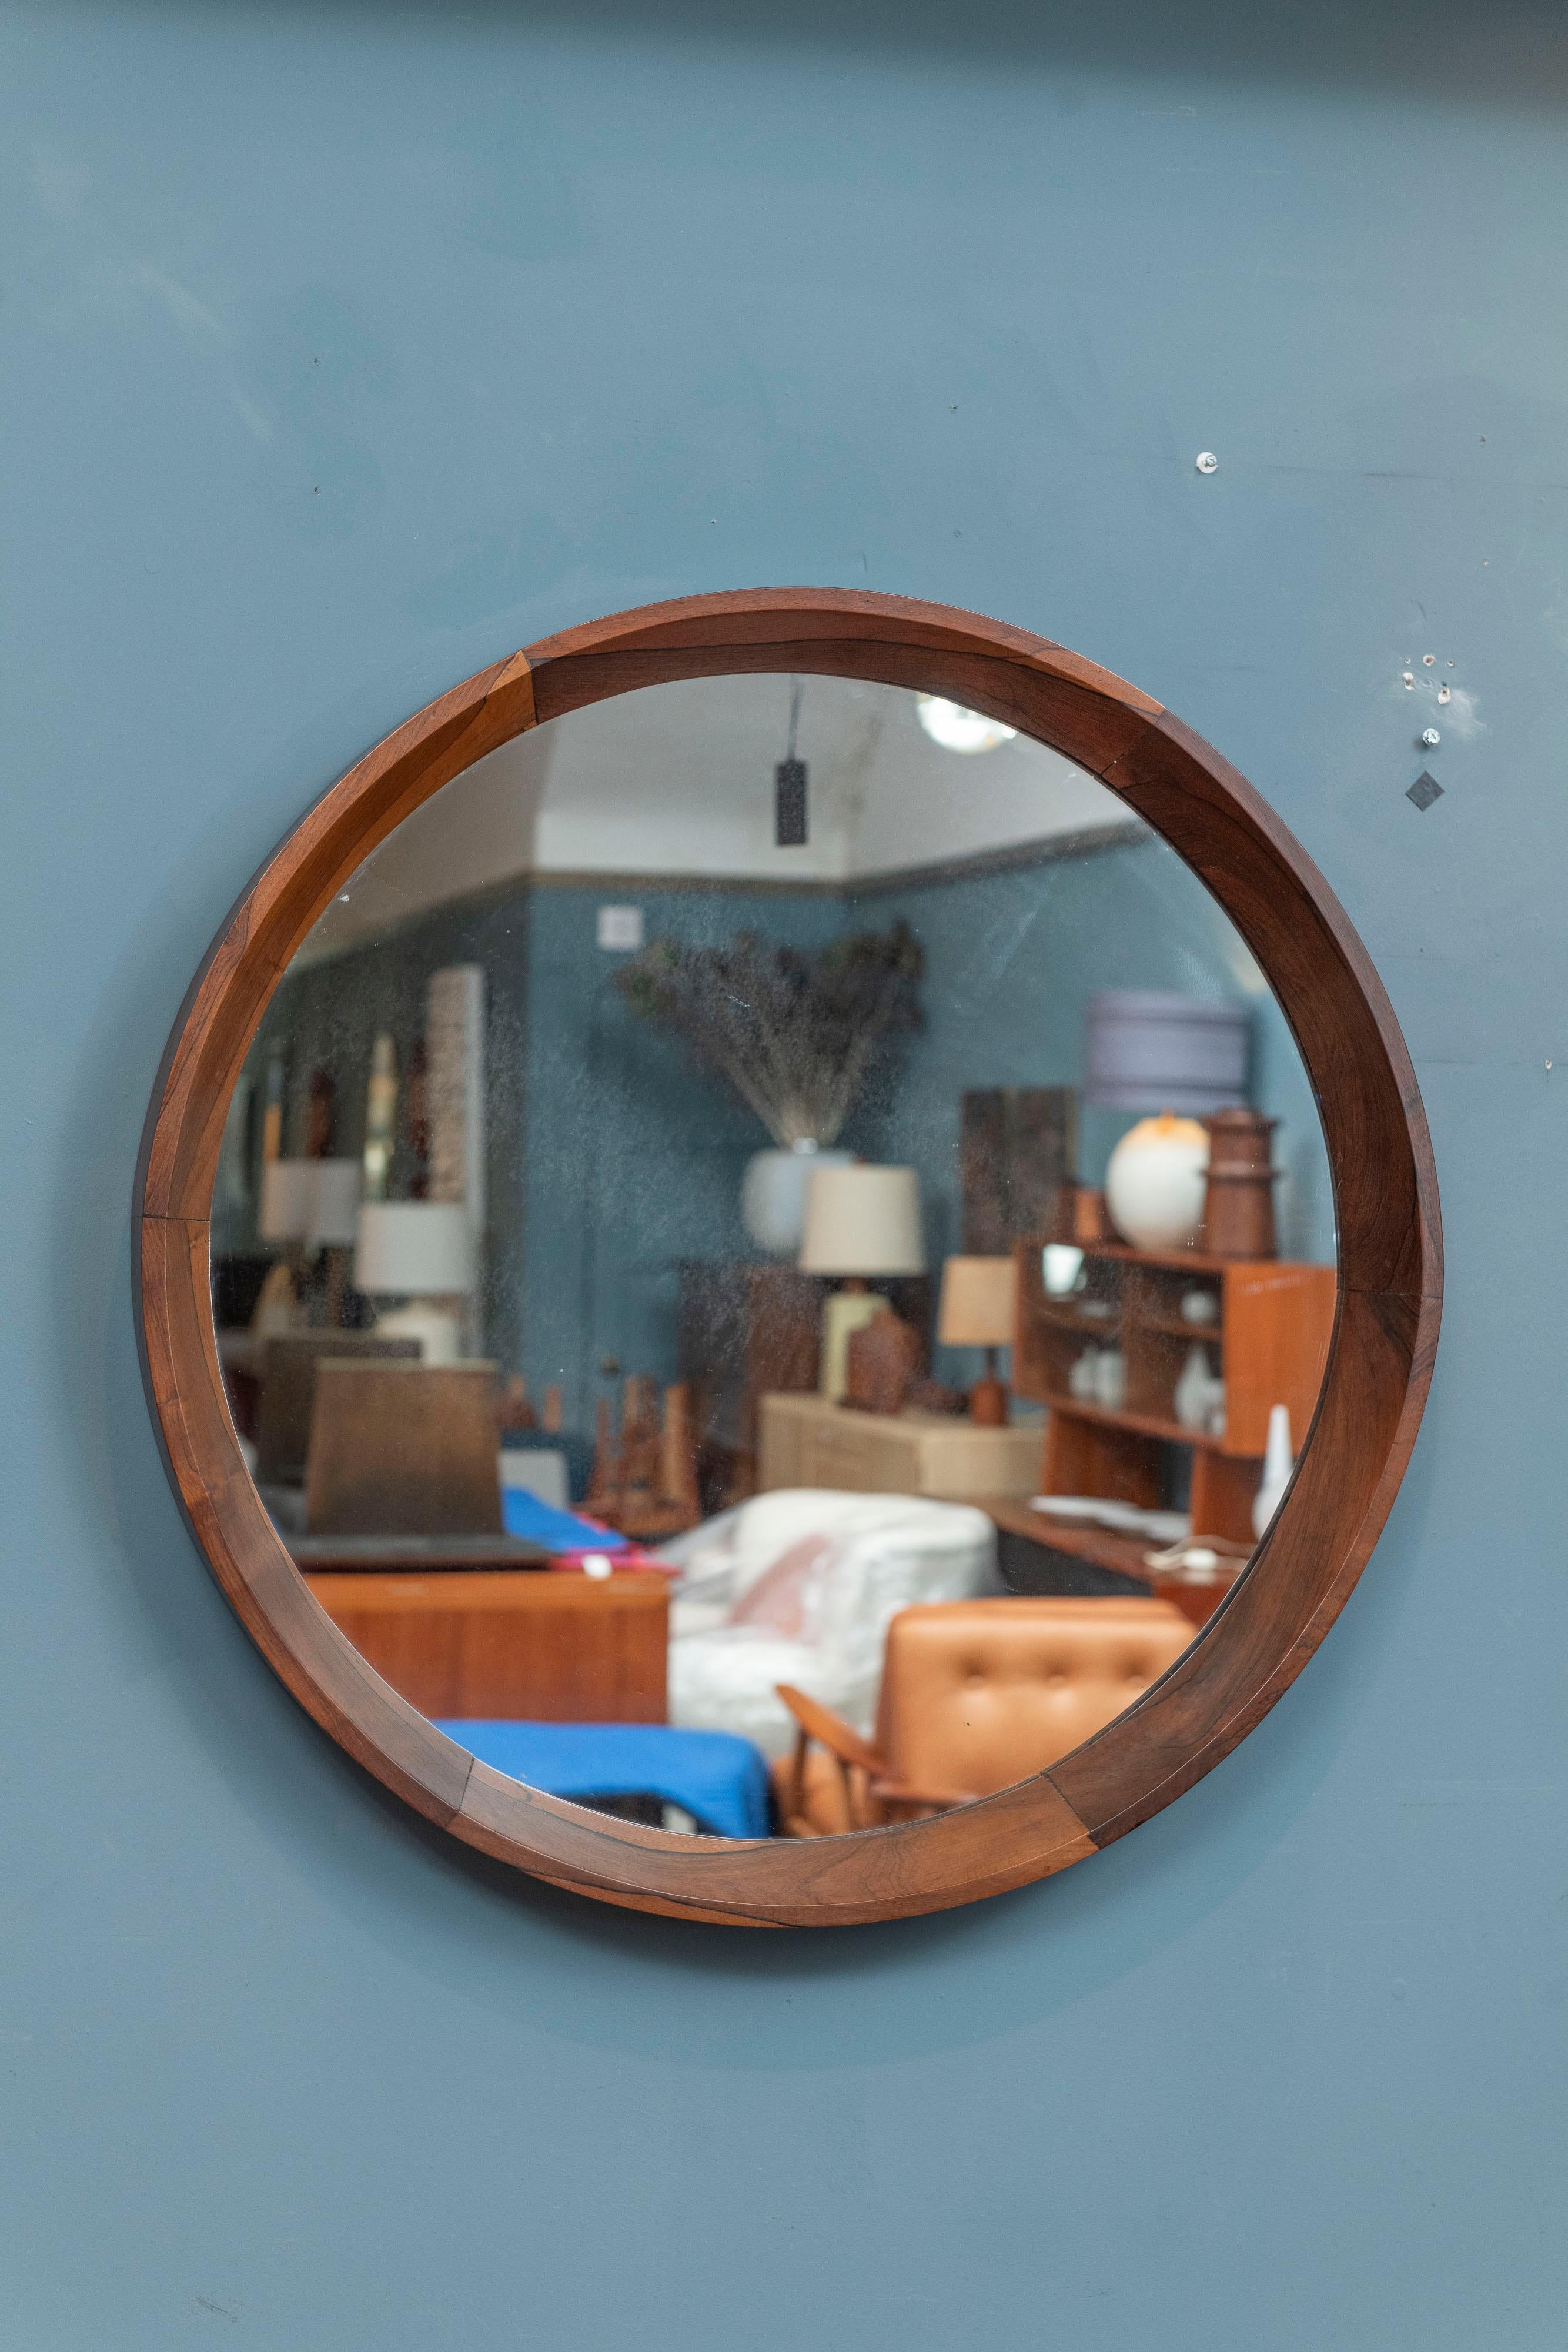 Sergio Rodrigues design circular wall mirror with a mitered interior frame in gorgeous Jacaranda wood. Large wall mirror in size and visual impact at 31.5 inches in diameter and 2.75 inches in depth. Hand made in his typical construction technique